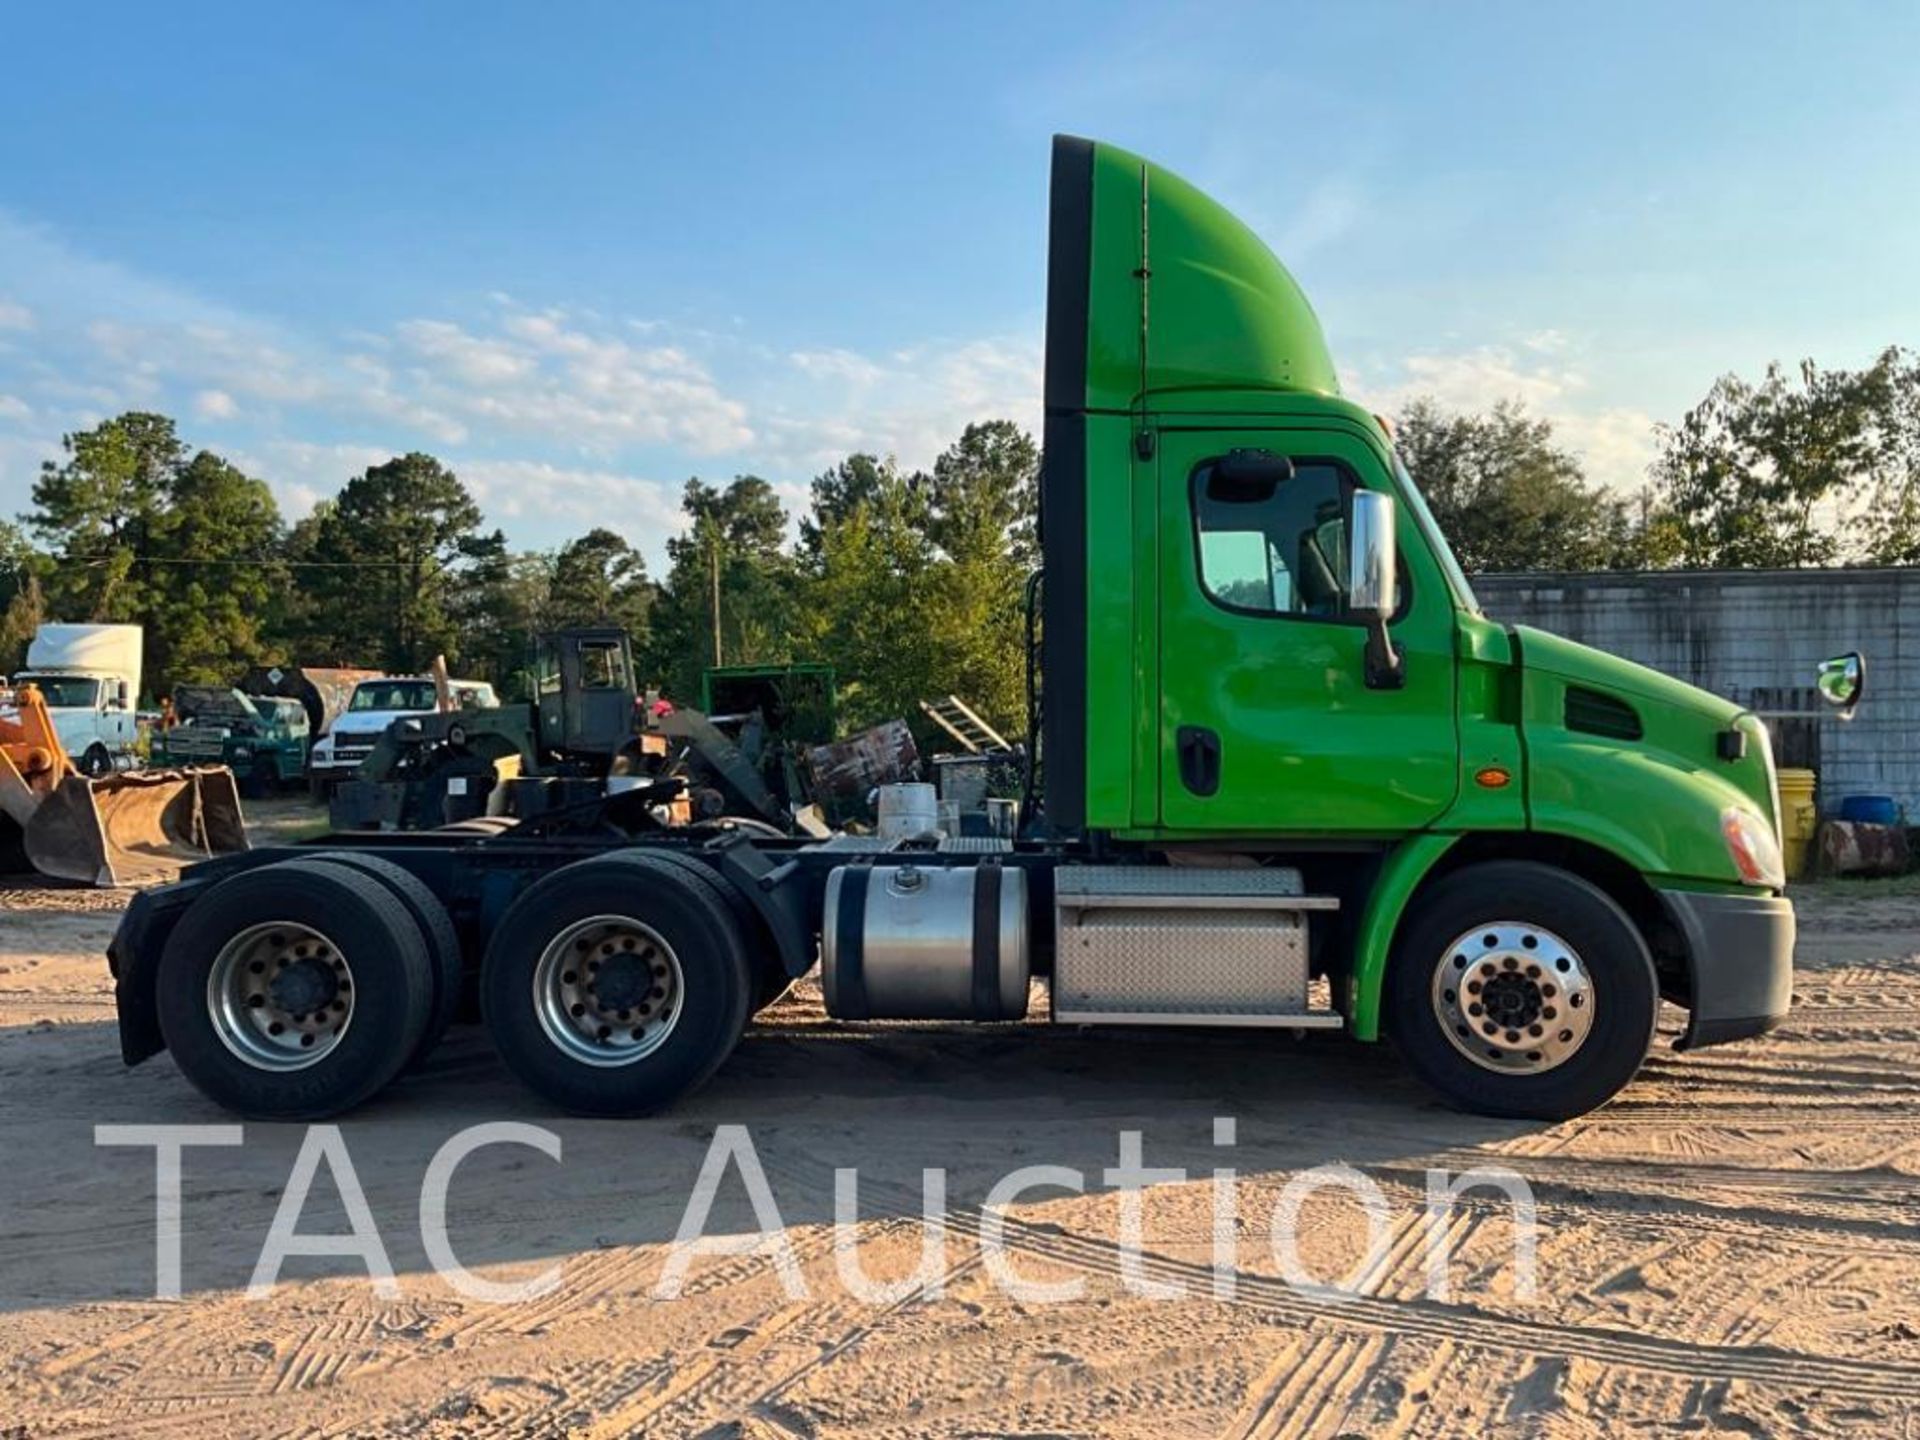 2017 Freightliner Cascadia Day Cab - Image 13 of 114